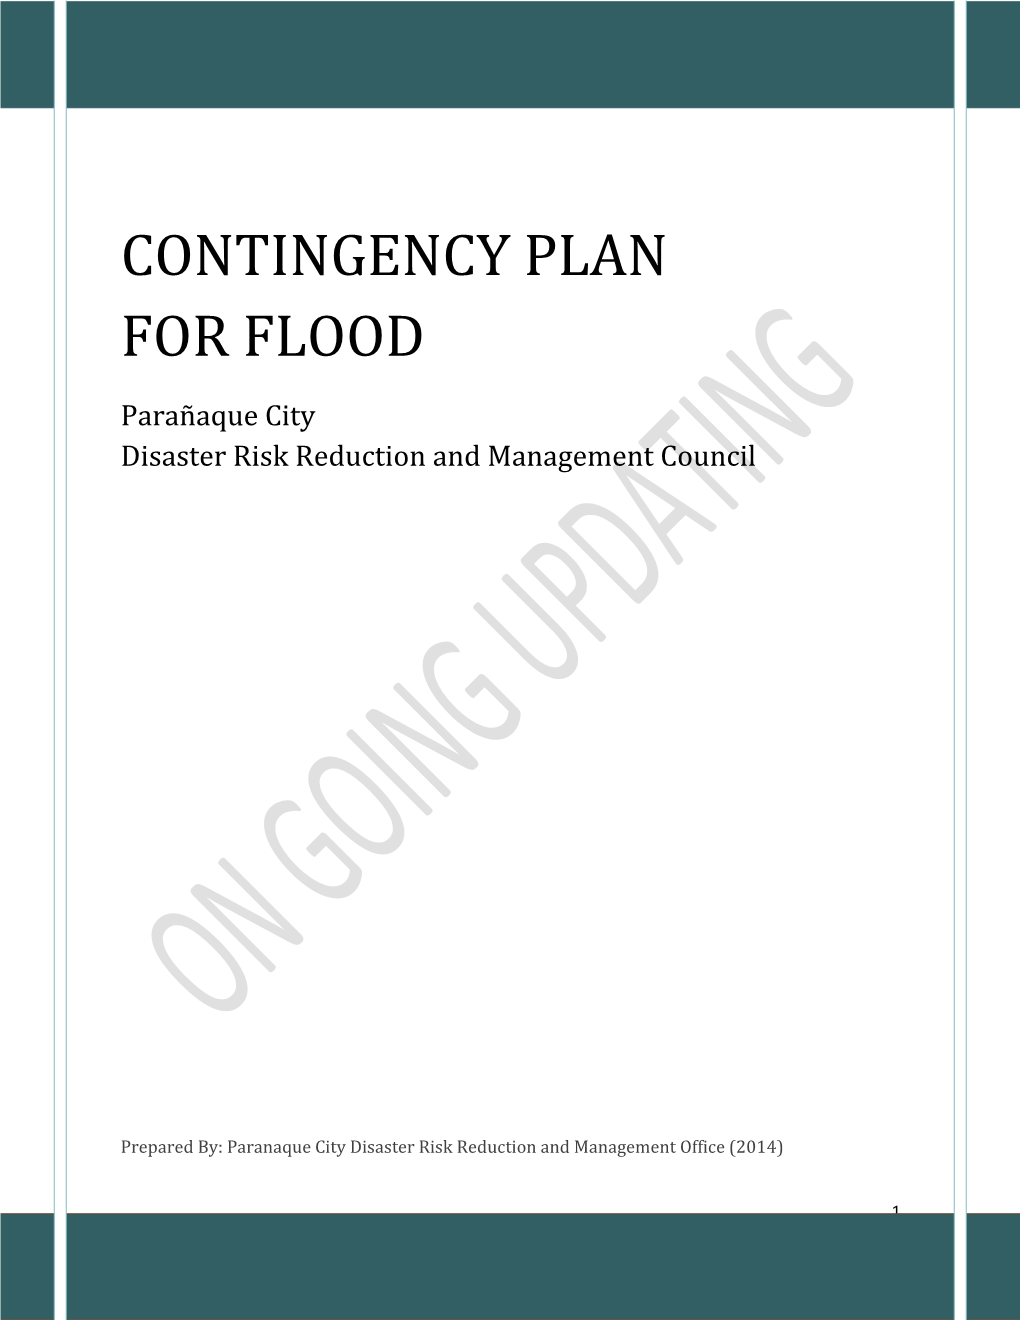 Contingency Plan for Flood